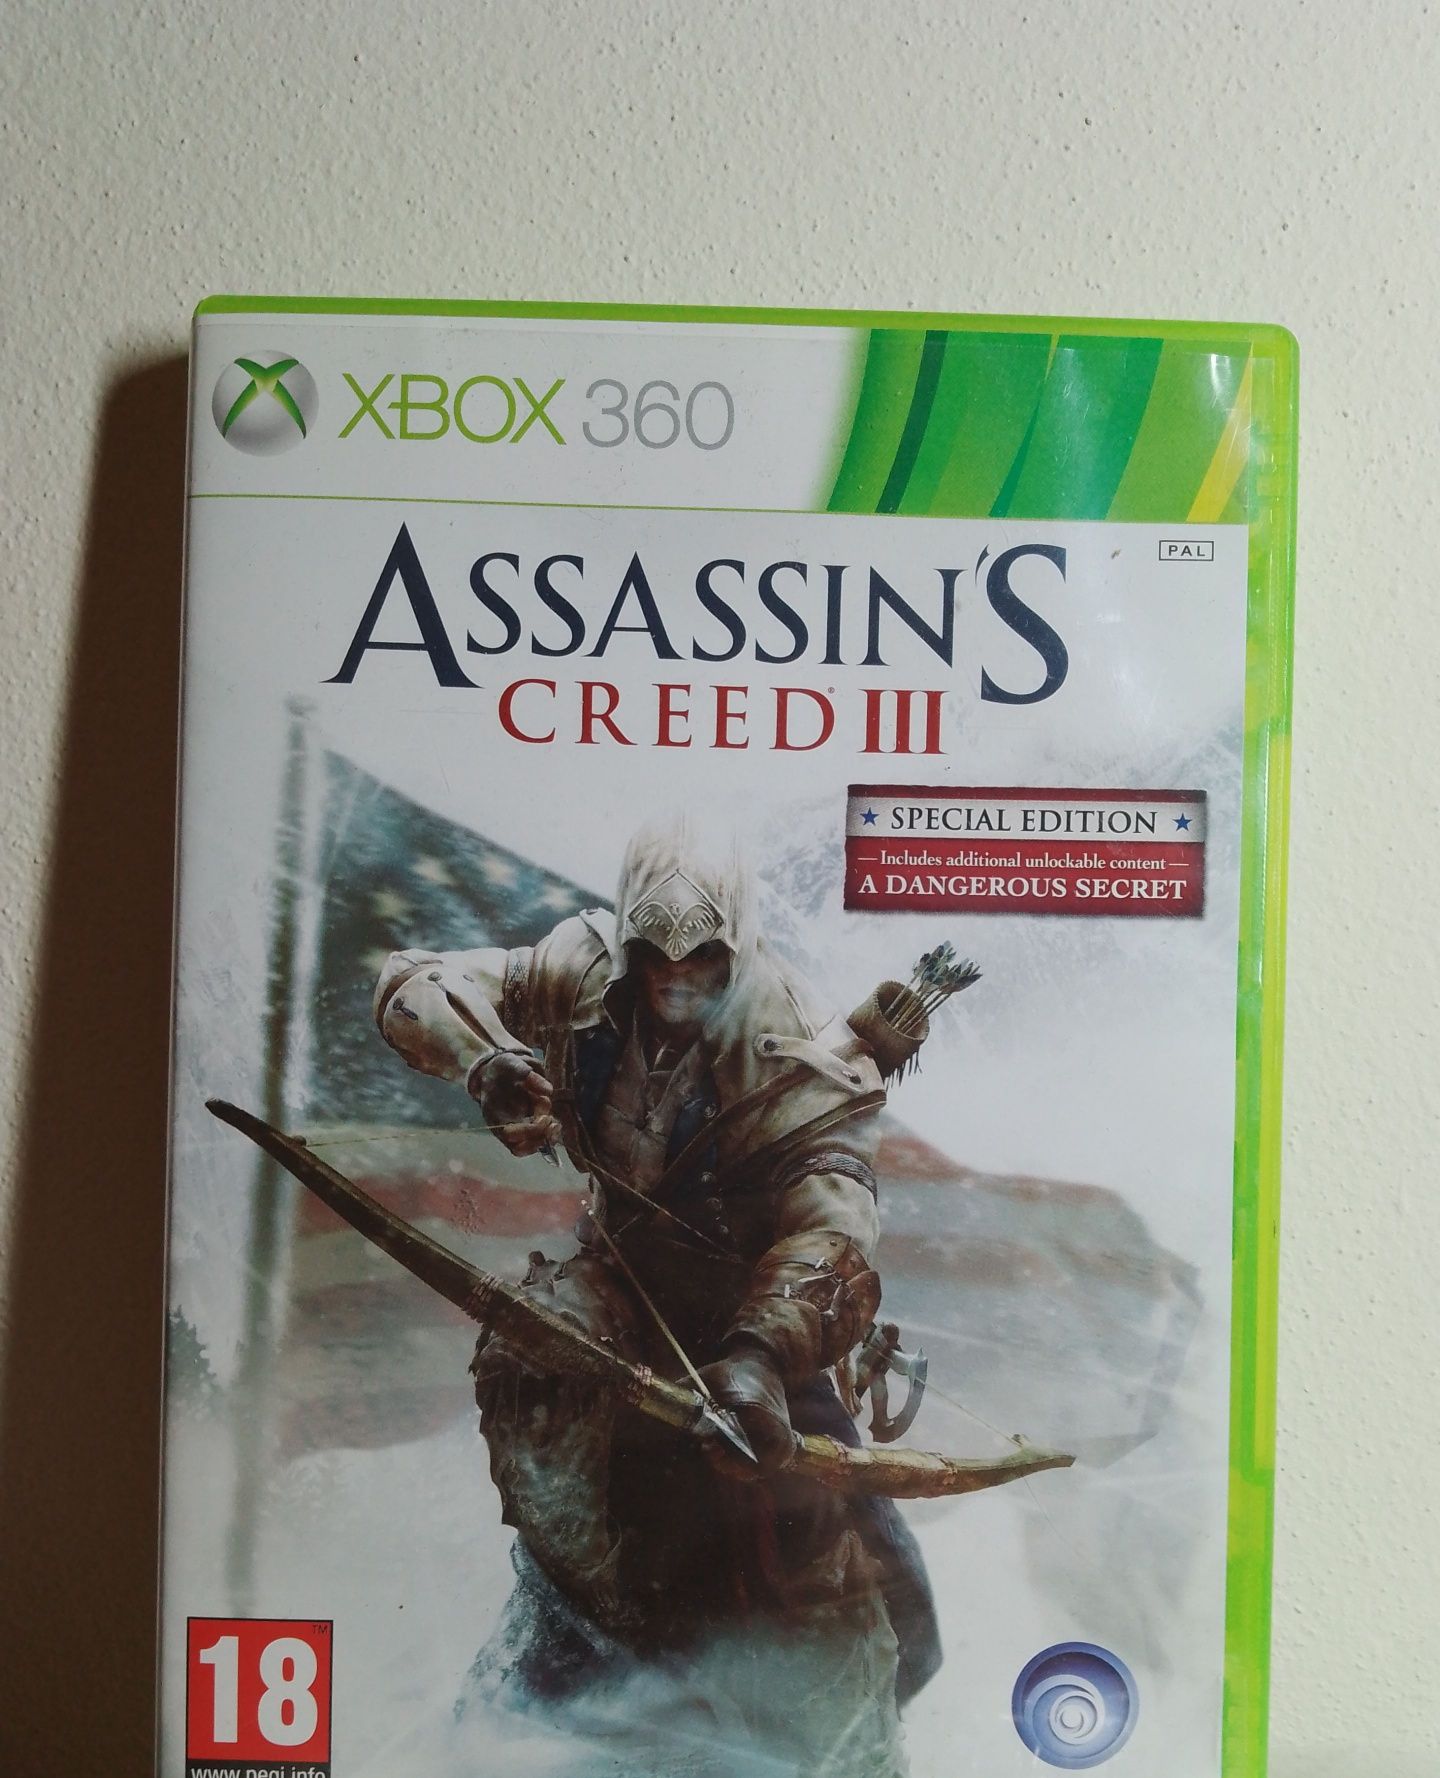 Assassin's Creed III Special edition